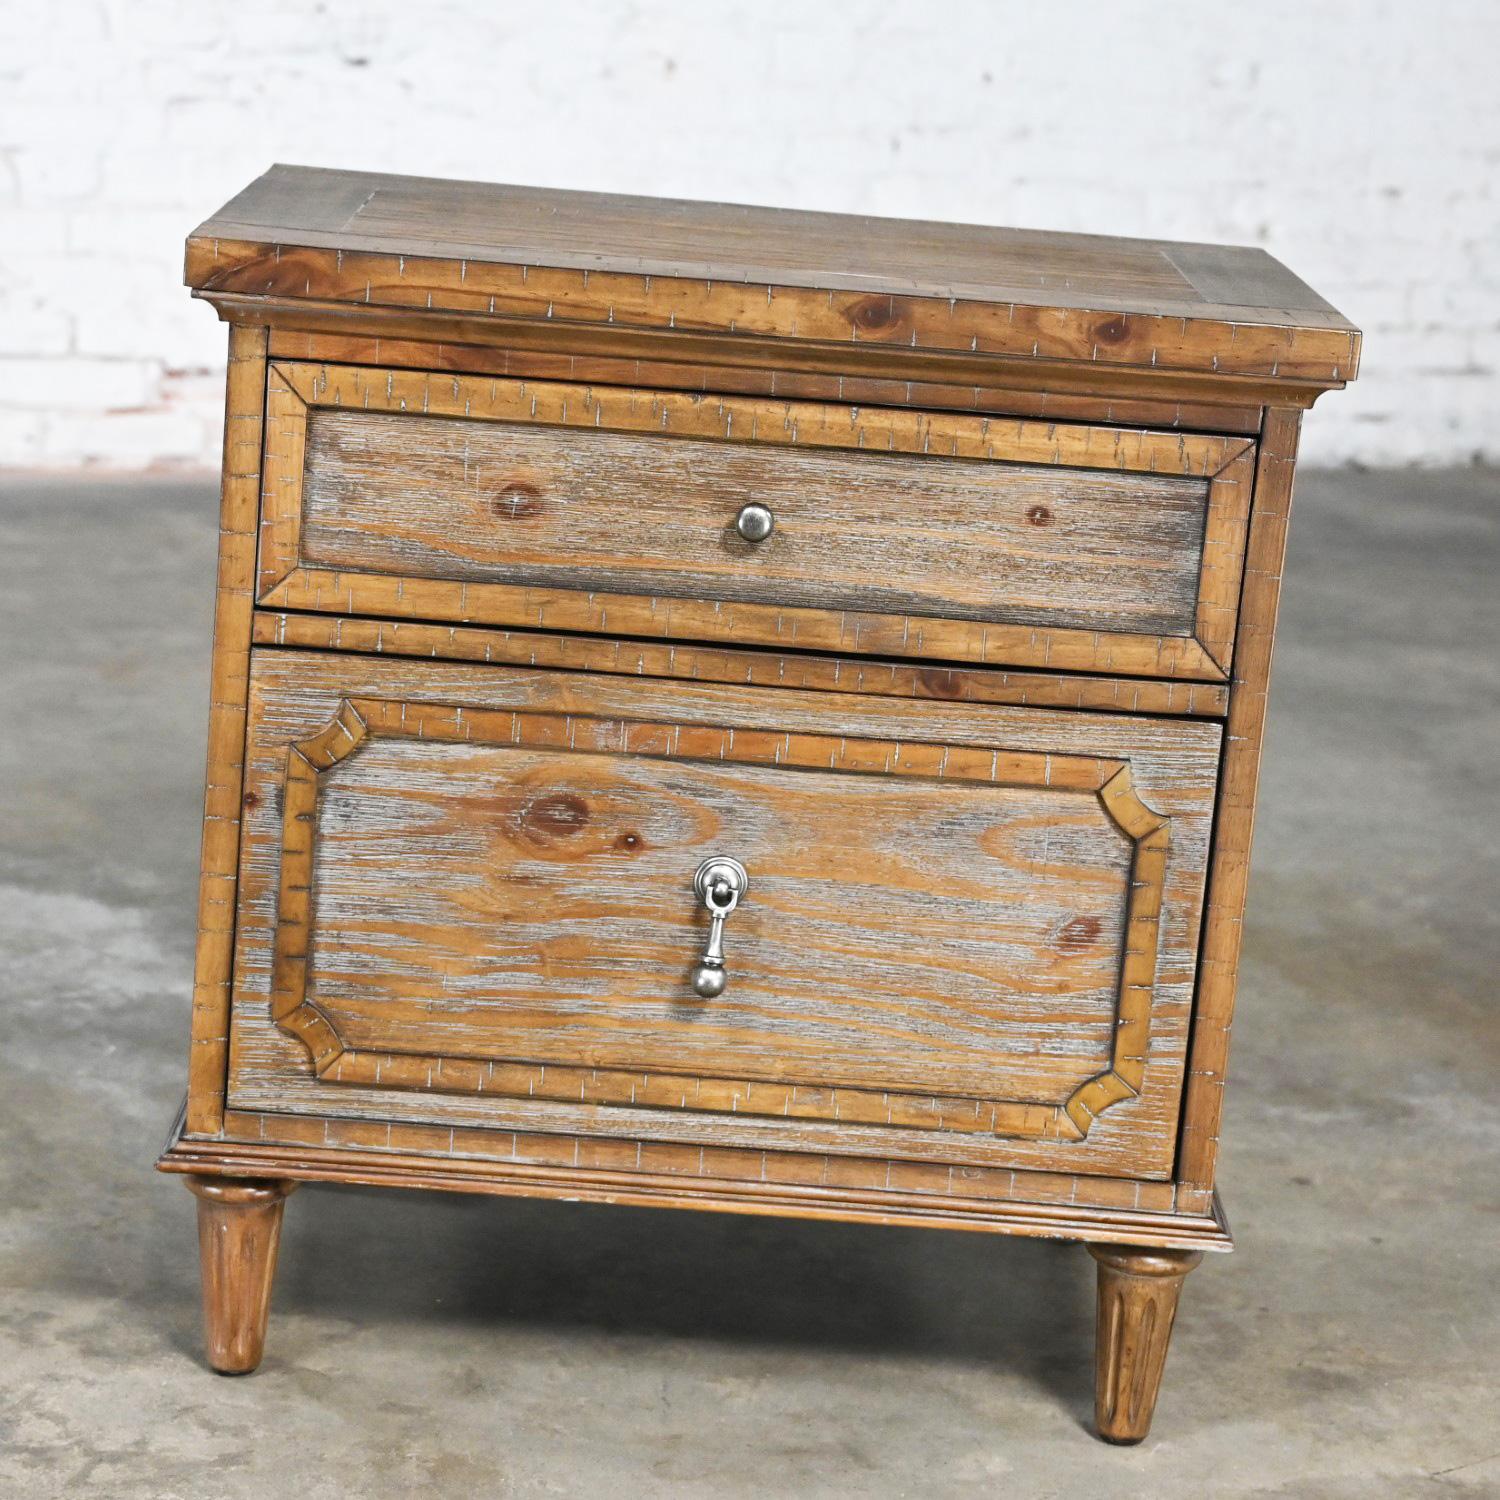 Early 21st Century French Country Rustic Mahogany Nightstand End Table Cabinet In Good Condition For Sale In Topeka, KS